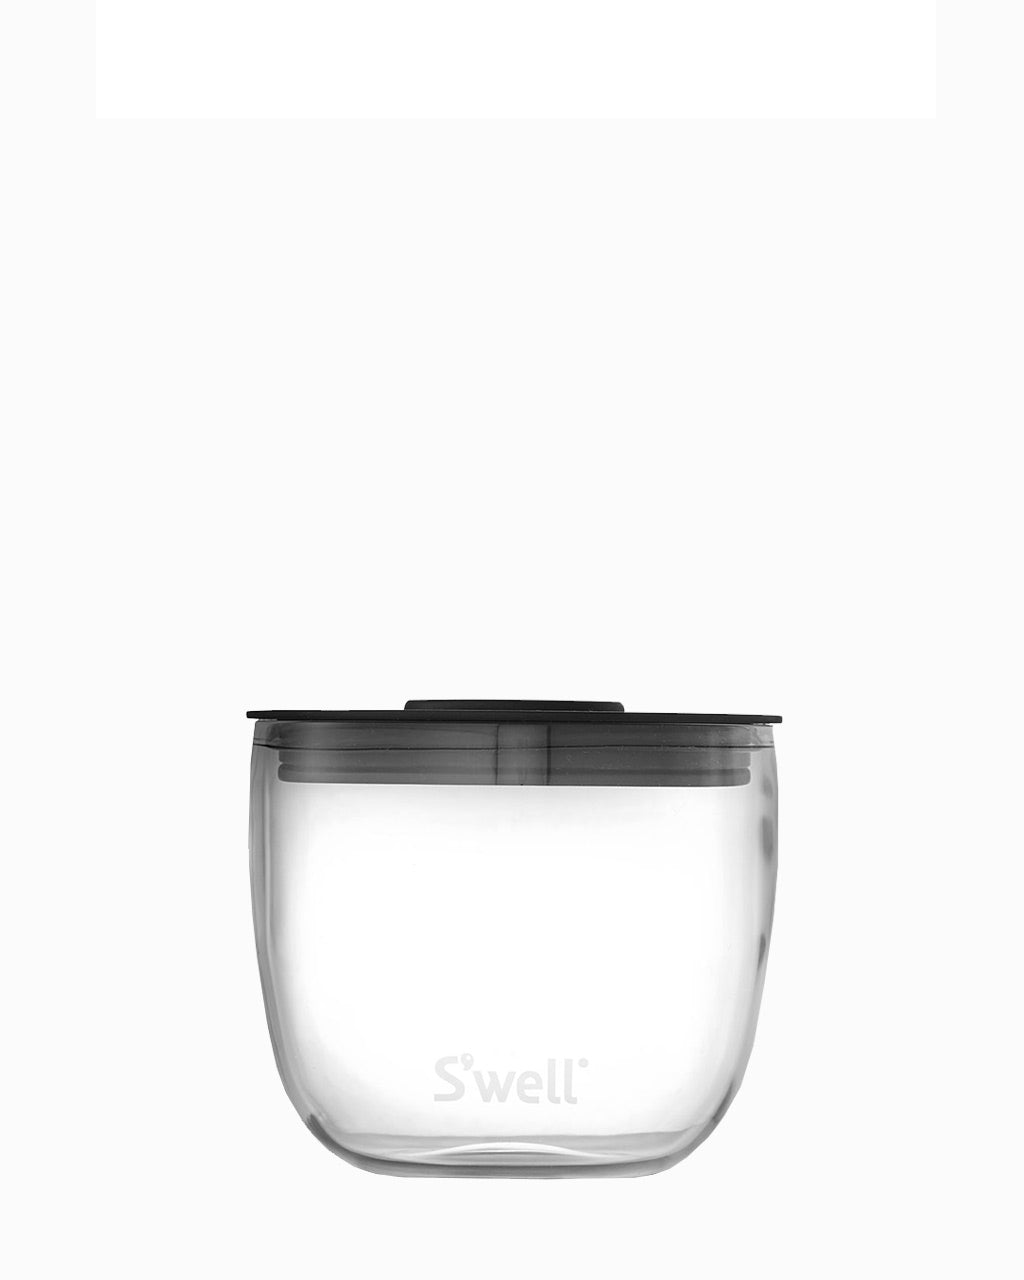 S'well Wood S'well,Stainless Steel Eats 2-in-1 Nesting Food Bowls